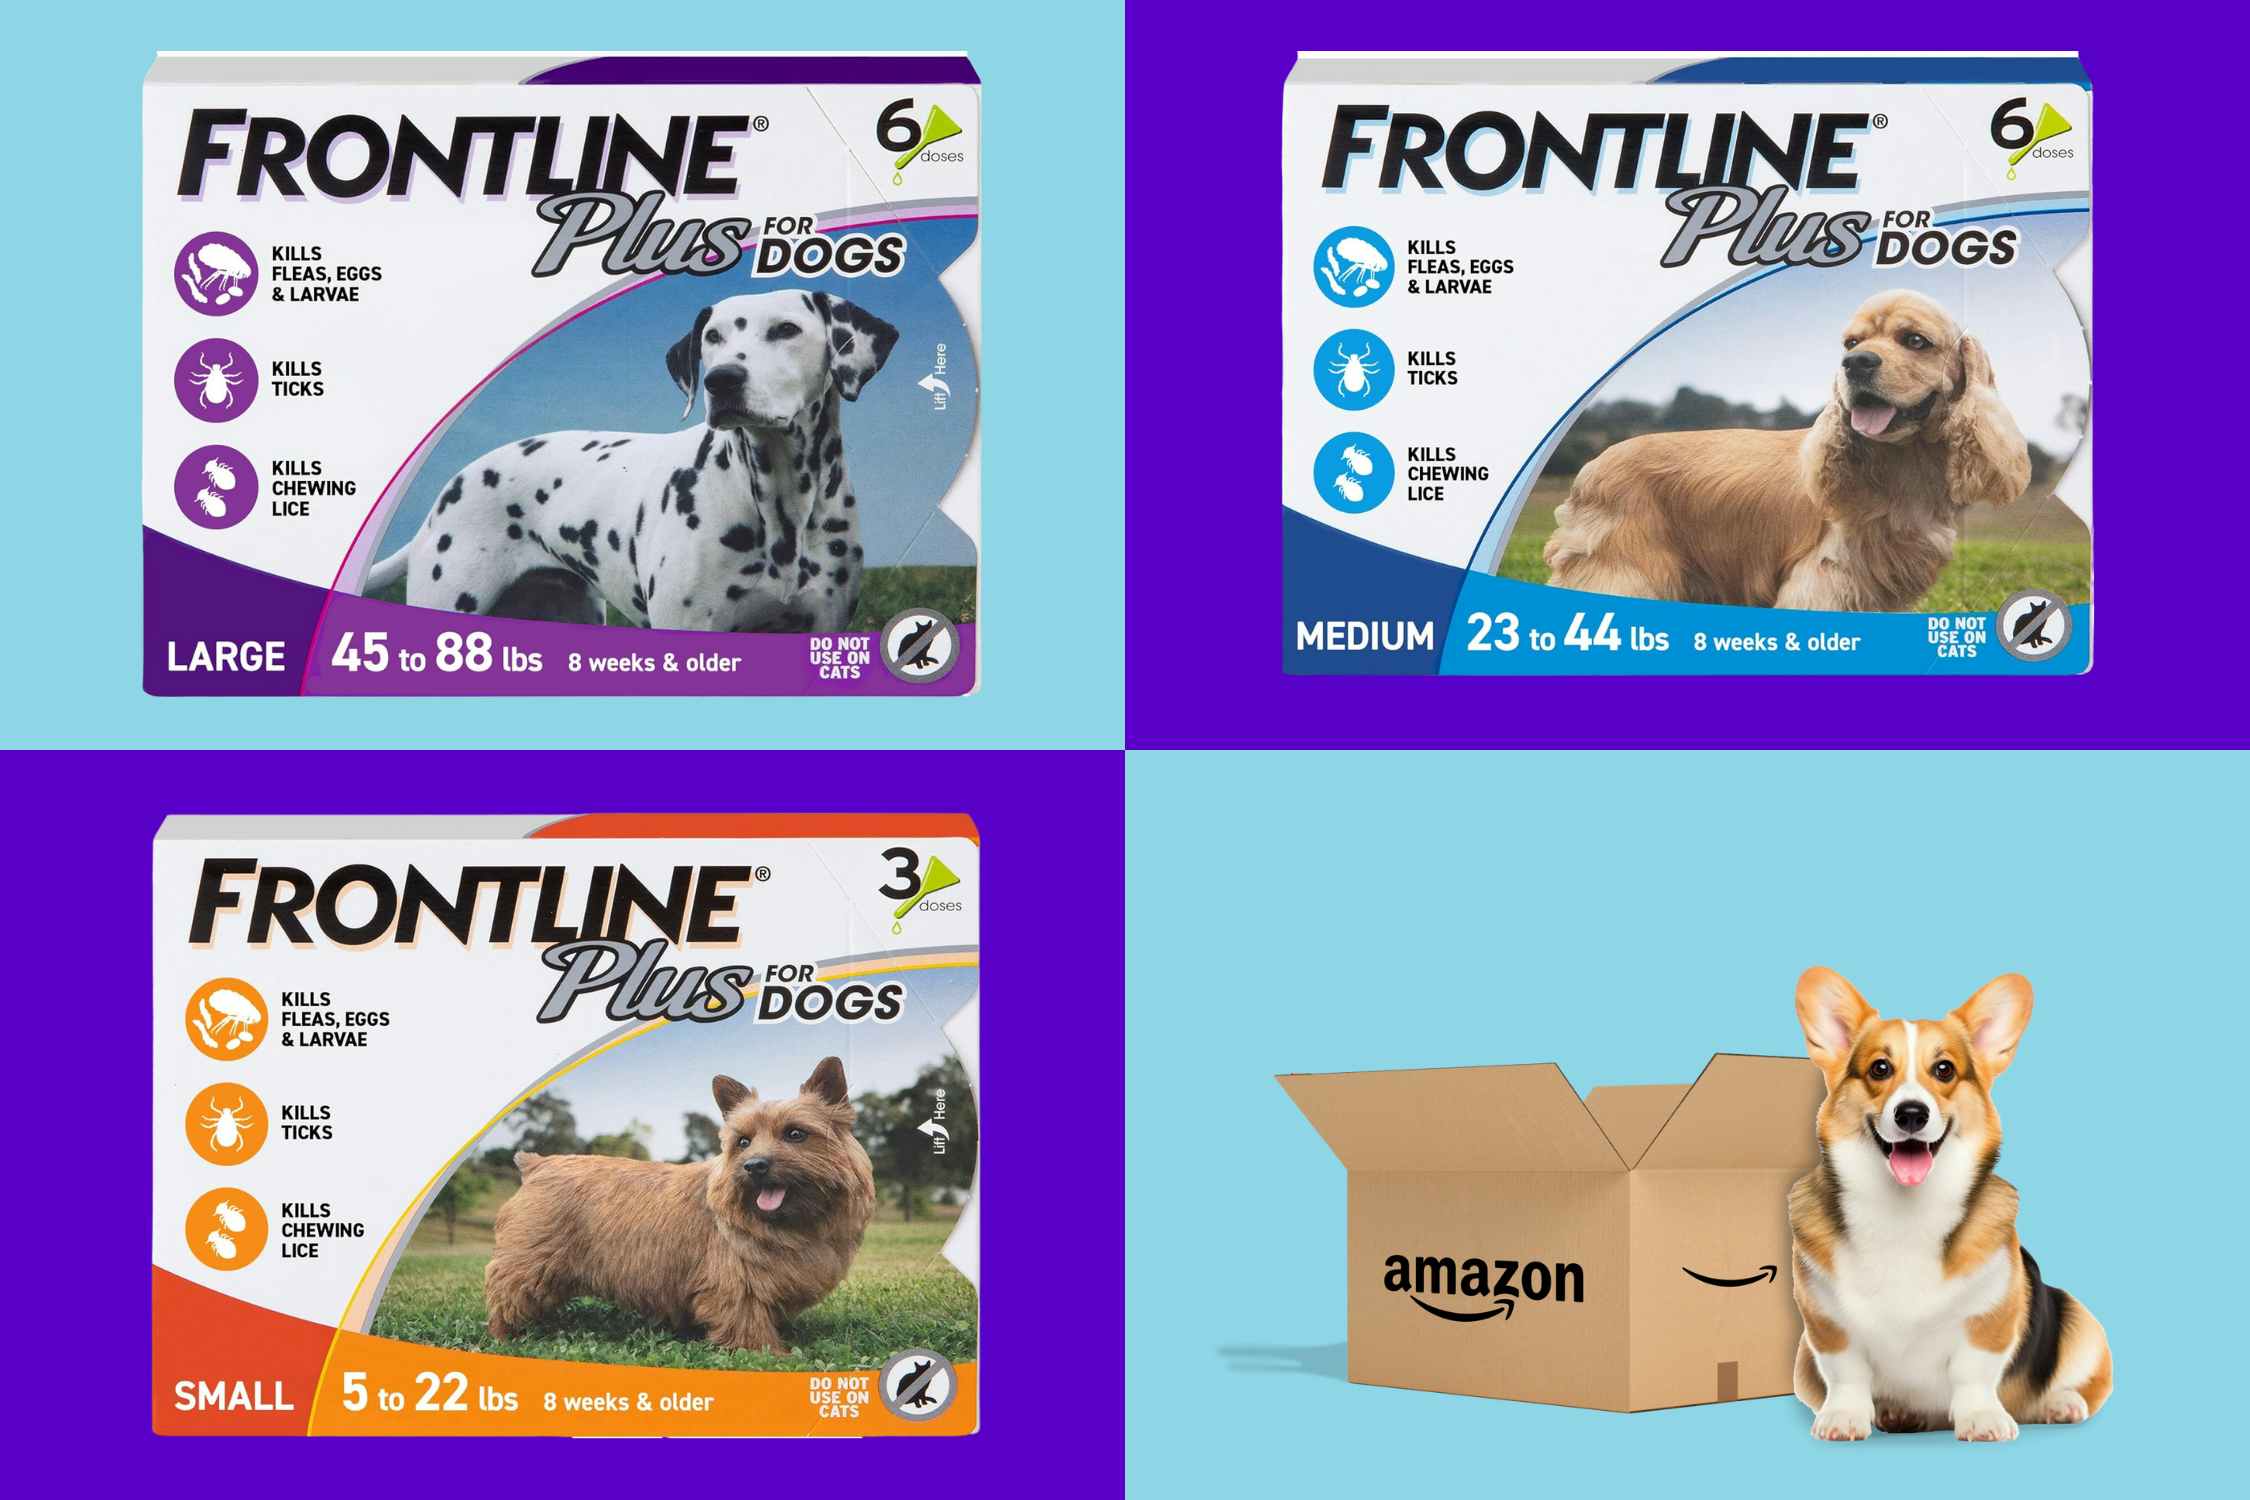 Frontline Plus Flea and Tick Treatments, as Low as $25.52 for Amazon Pet Day